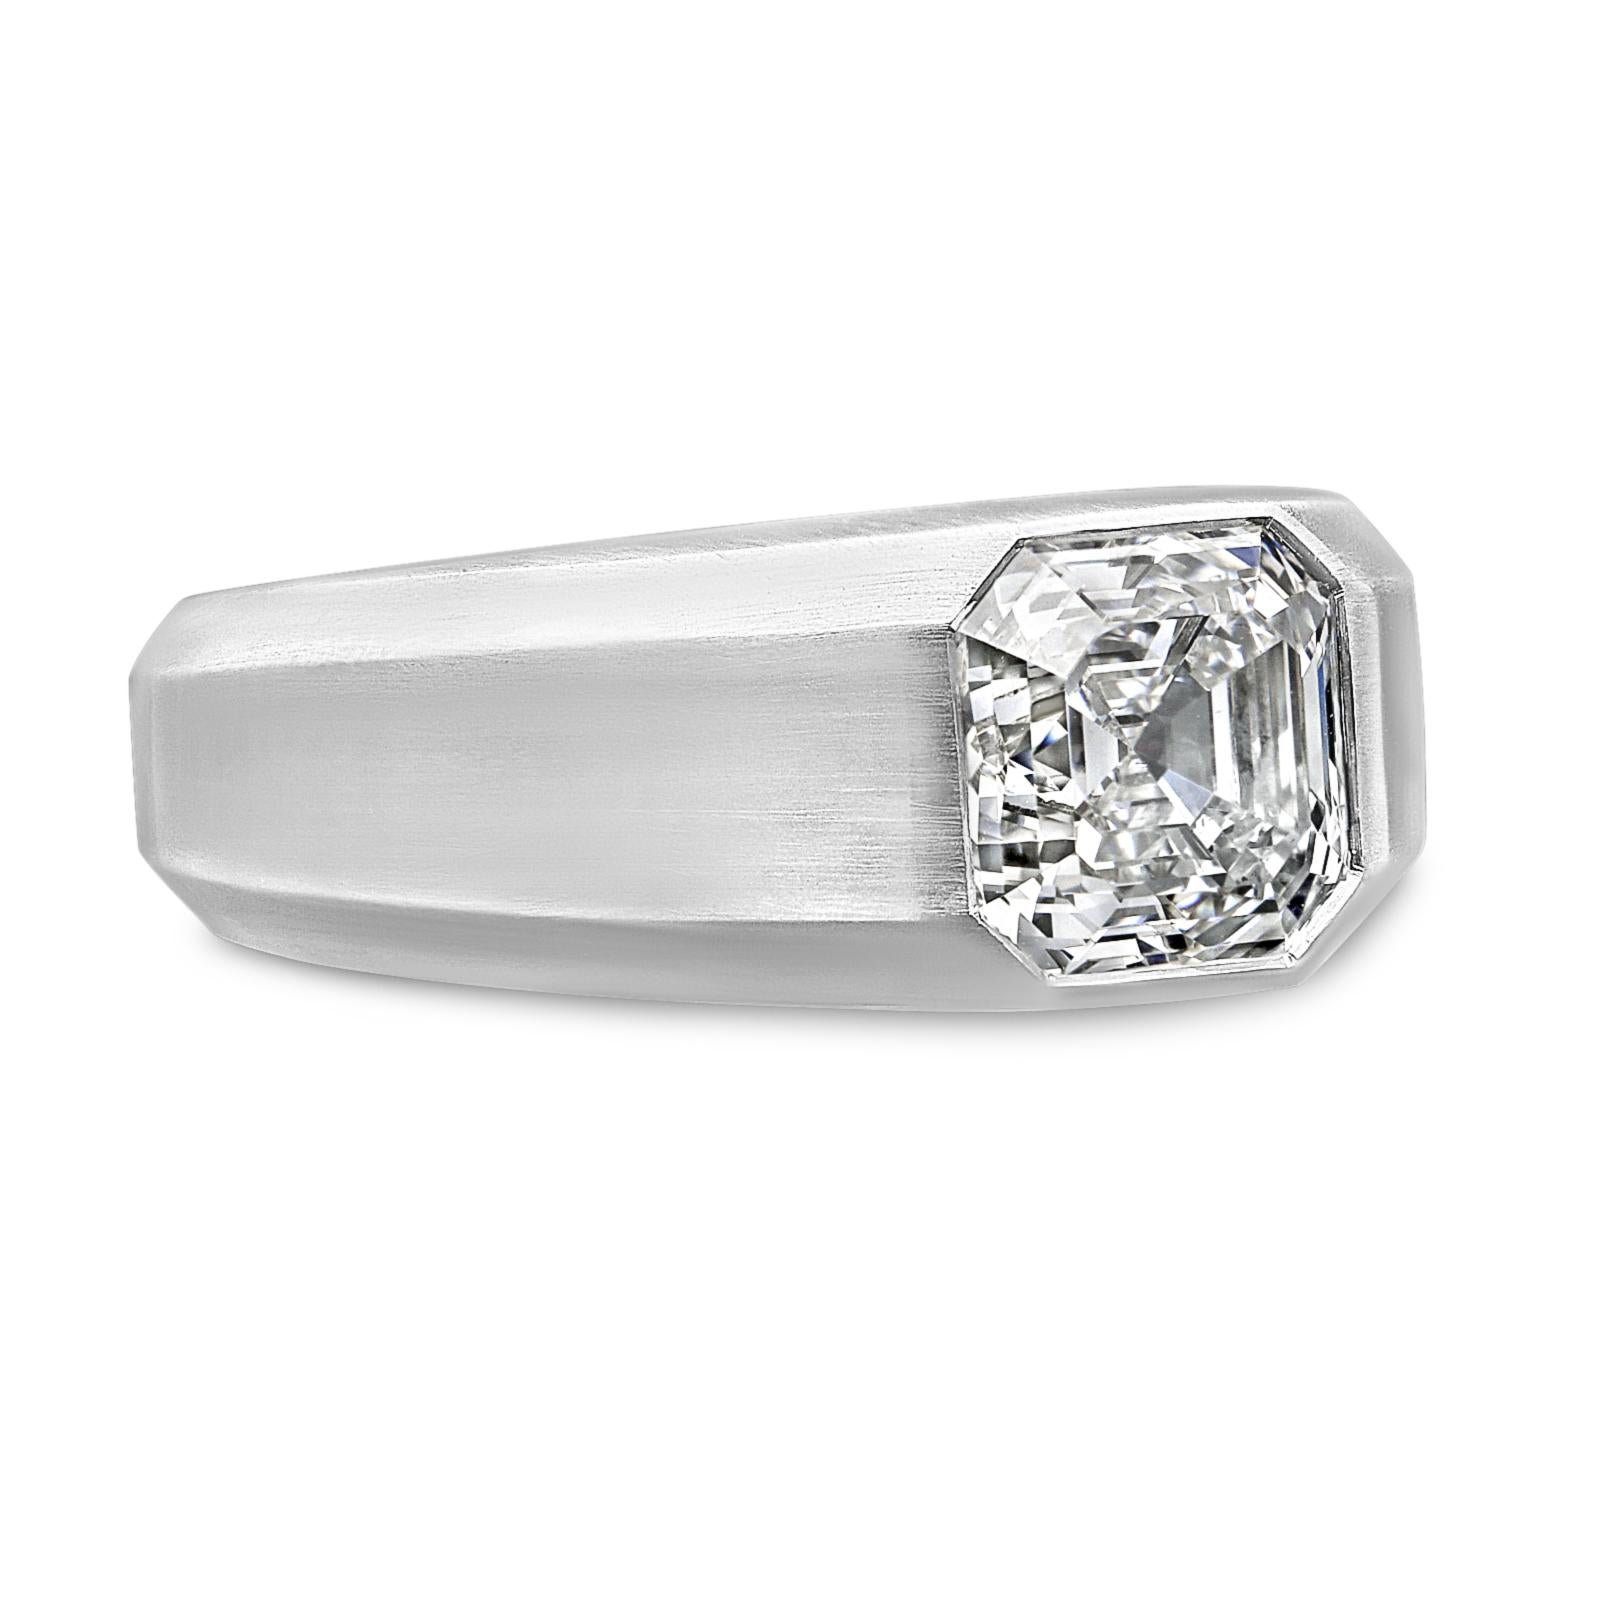 A strikingly modern Asscher cut diamond and platinum ring by Hancocks, centred on a beautiful gypsy set Asscher cut diamond weighing 2.01cts and of F colour and VS2 clarity within a wide tapering hand crafted platinum band with bevelled edges